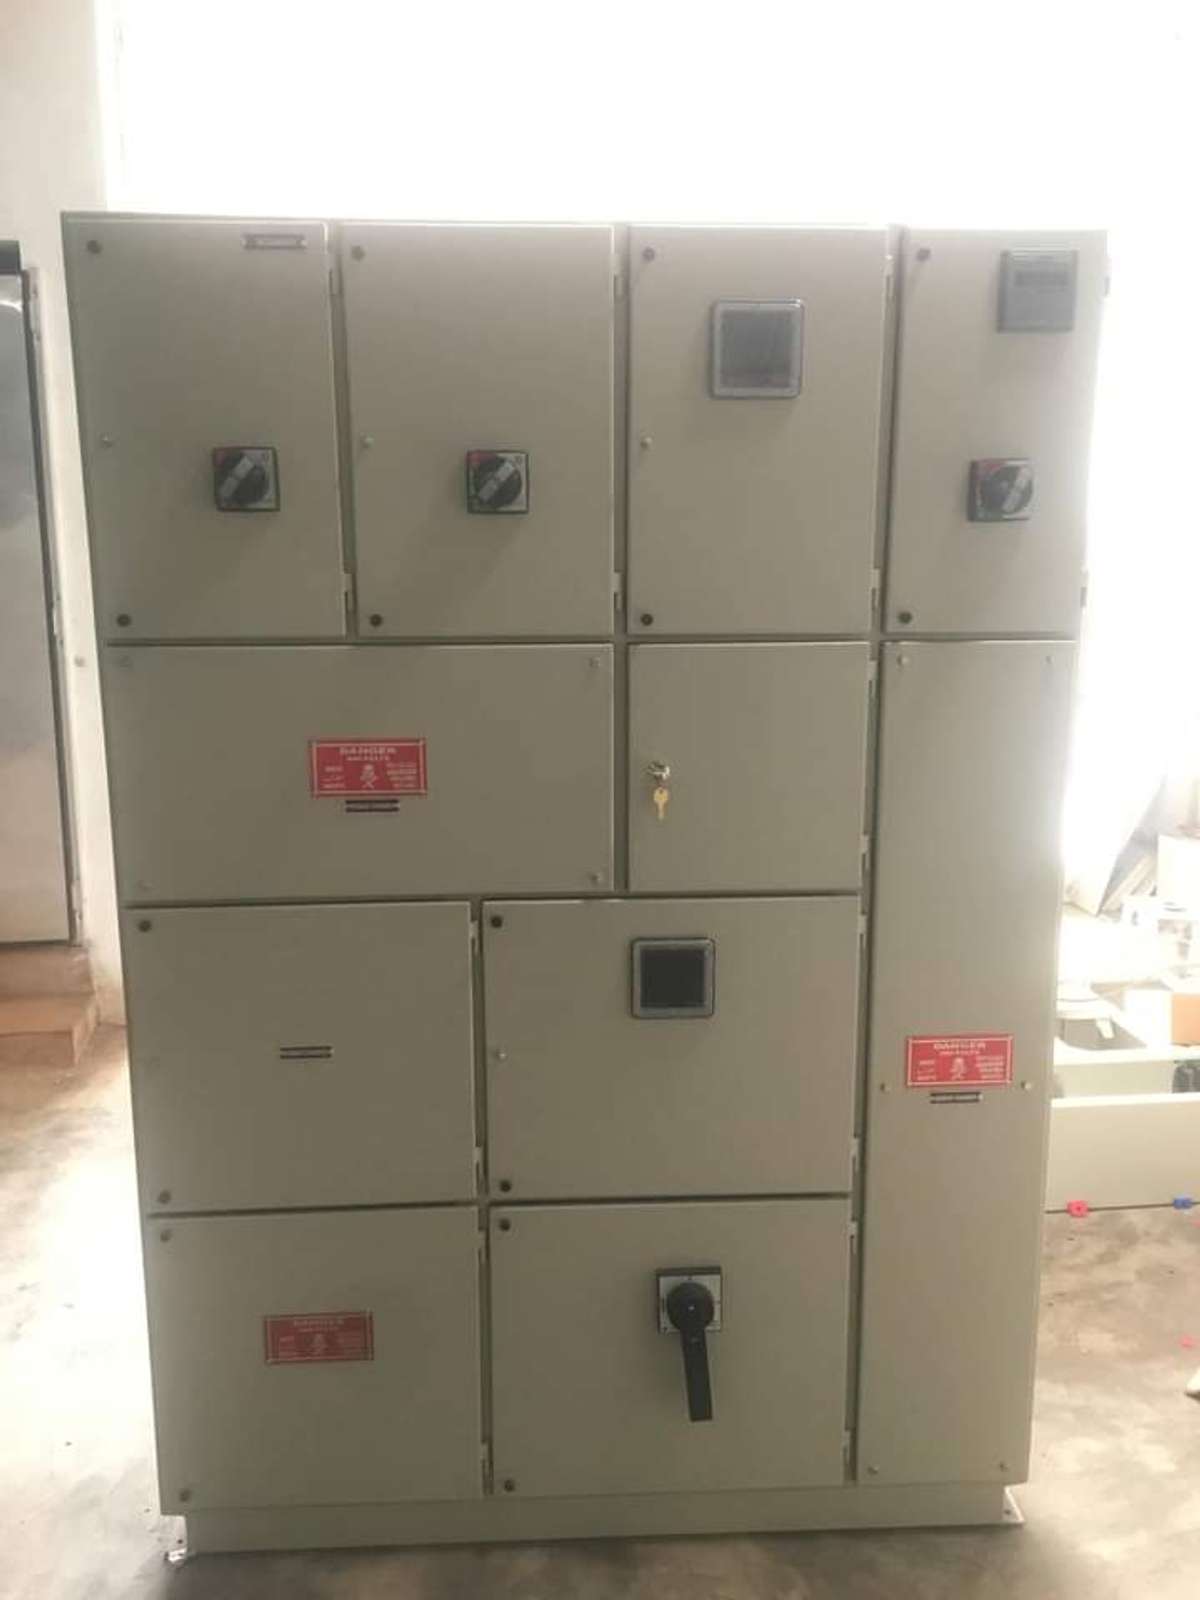 3PHASE AND SINGLE PHASE METERING PANELS 

#ELECTRIC #electricalaccessories #Electrical #ElectricalDesigns #electrcialcontractor #electricaldrawing #electricaldesigning #electricalswitches

CONTACT NUMBER 7592012615